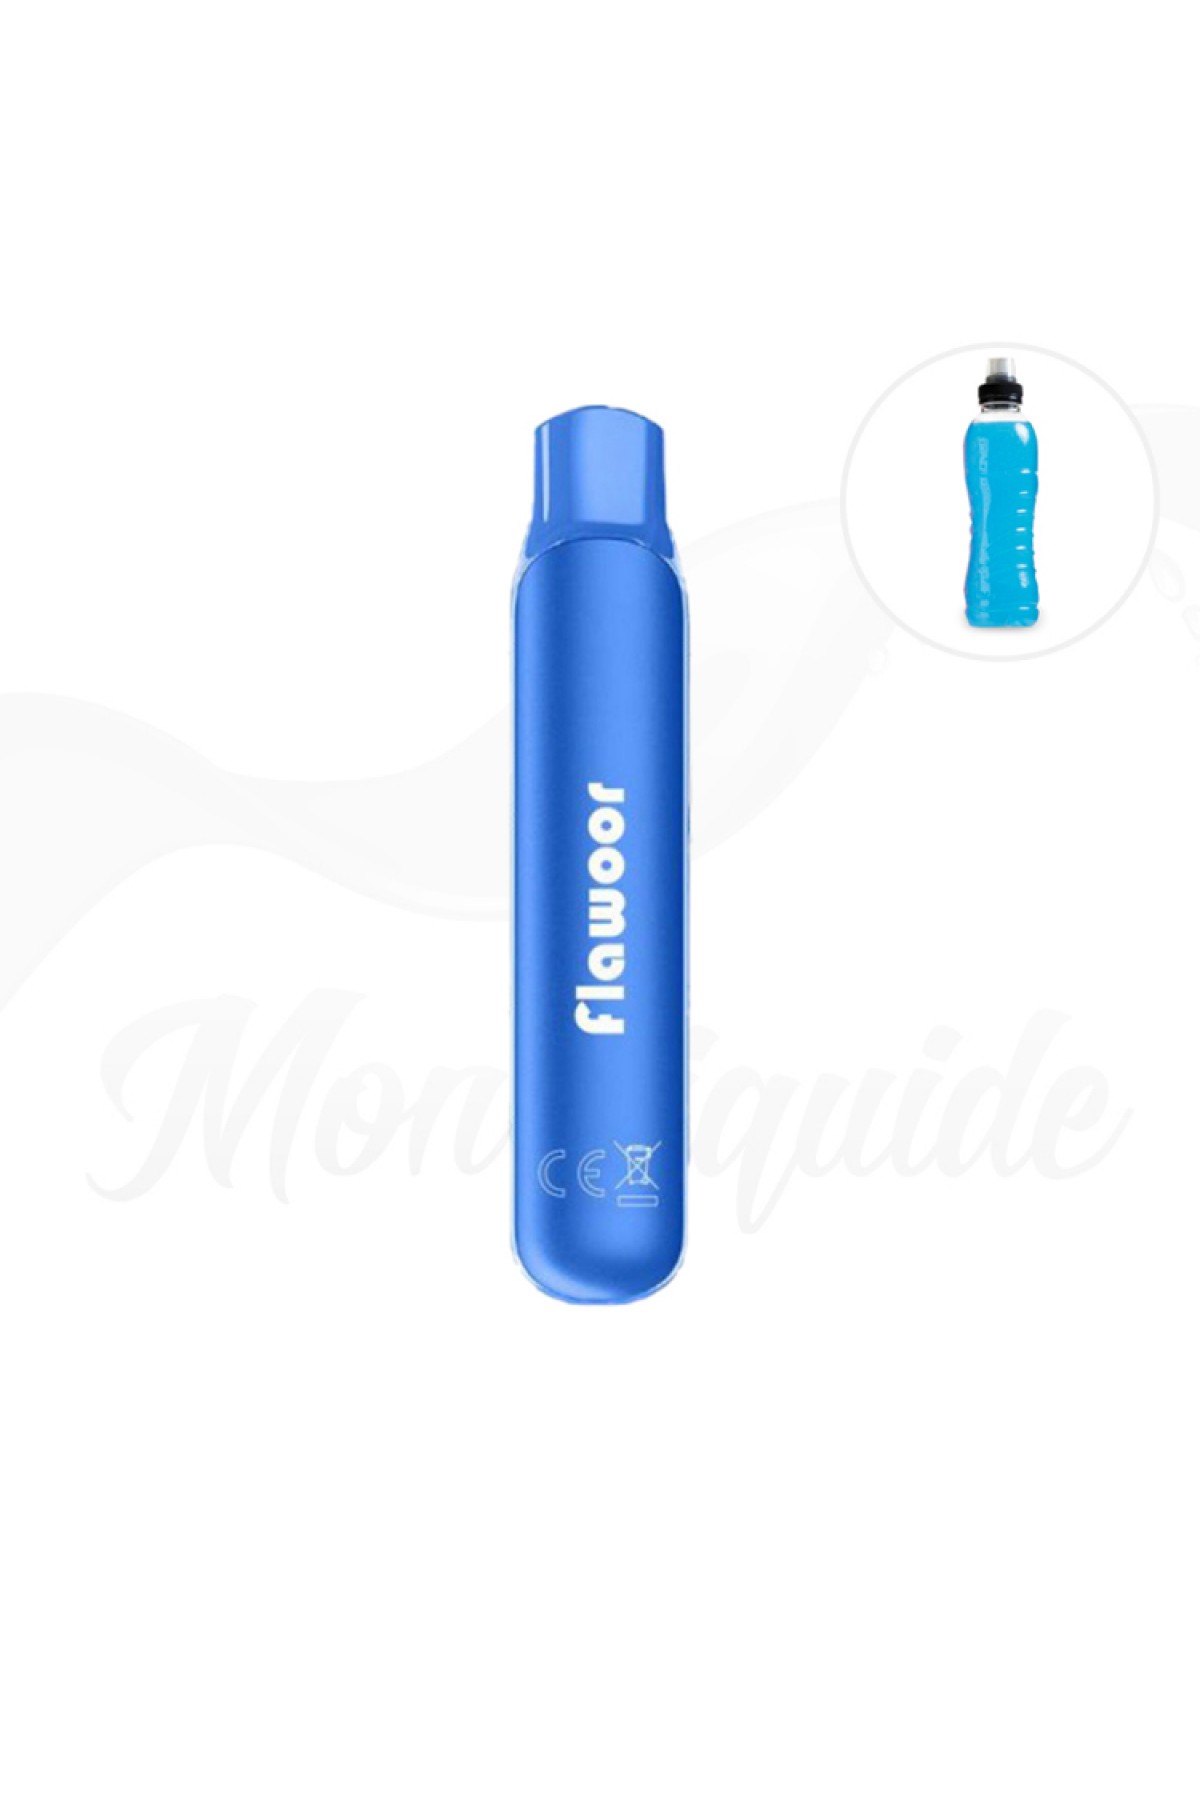 Flawoor Mate - Energy Drink 600 Puff Kit